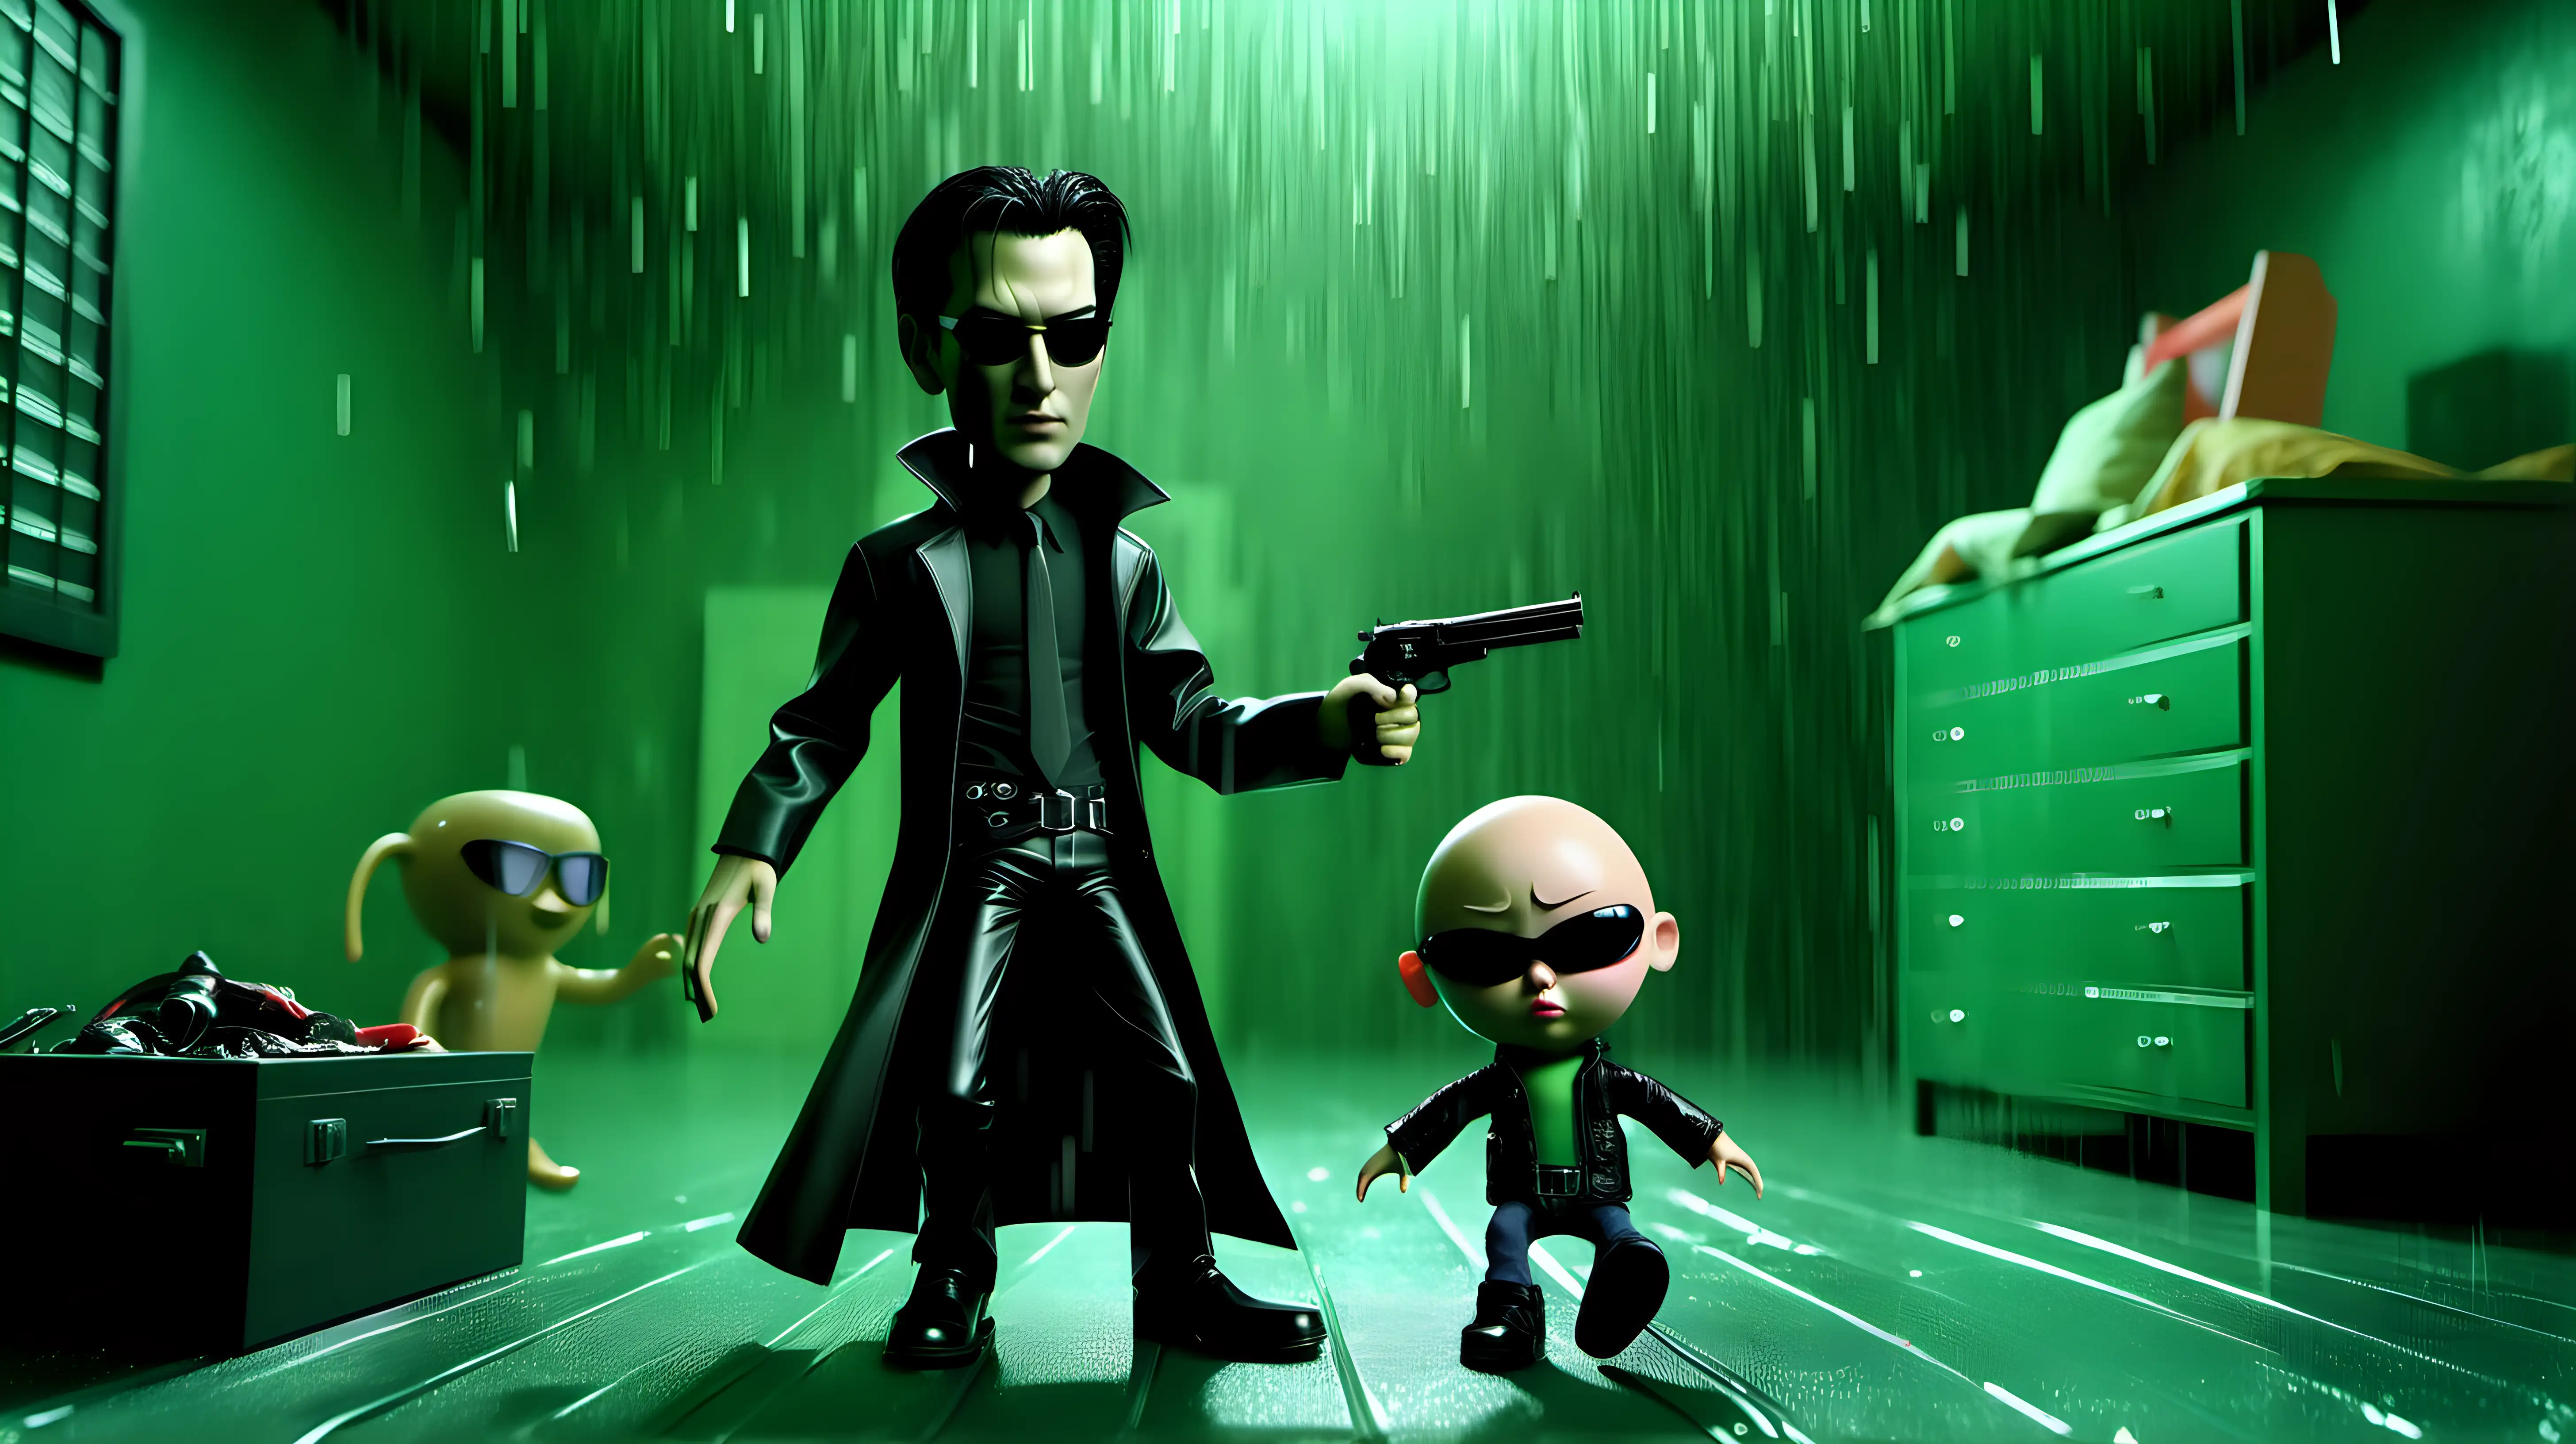 "A cartoon figure resembling Neo from 'The Matrix', complete with black sunglasses, is engaged in a playful fight with a cowboy doll character, reminiscent of but not identical to Woody from 'Toy Story'. This scene is imagined in a Pixar-like 3D animation style, characterized by vibrant colors and a cartoonish appearance. The setting is a child's bedroom, whimsically blending elements of both characters' worlds, including the iconic green code rain from 'The Matrix' in the background, adding a light-hearted and dramatic edge to the scene." --ar 16:9 --s 500 --w 600 --style raw --v 6.0